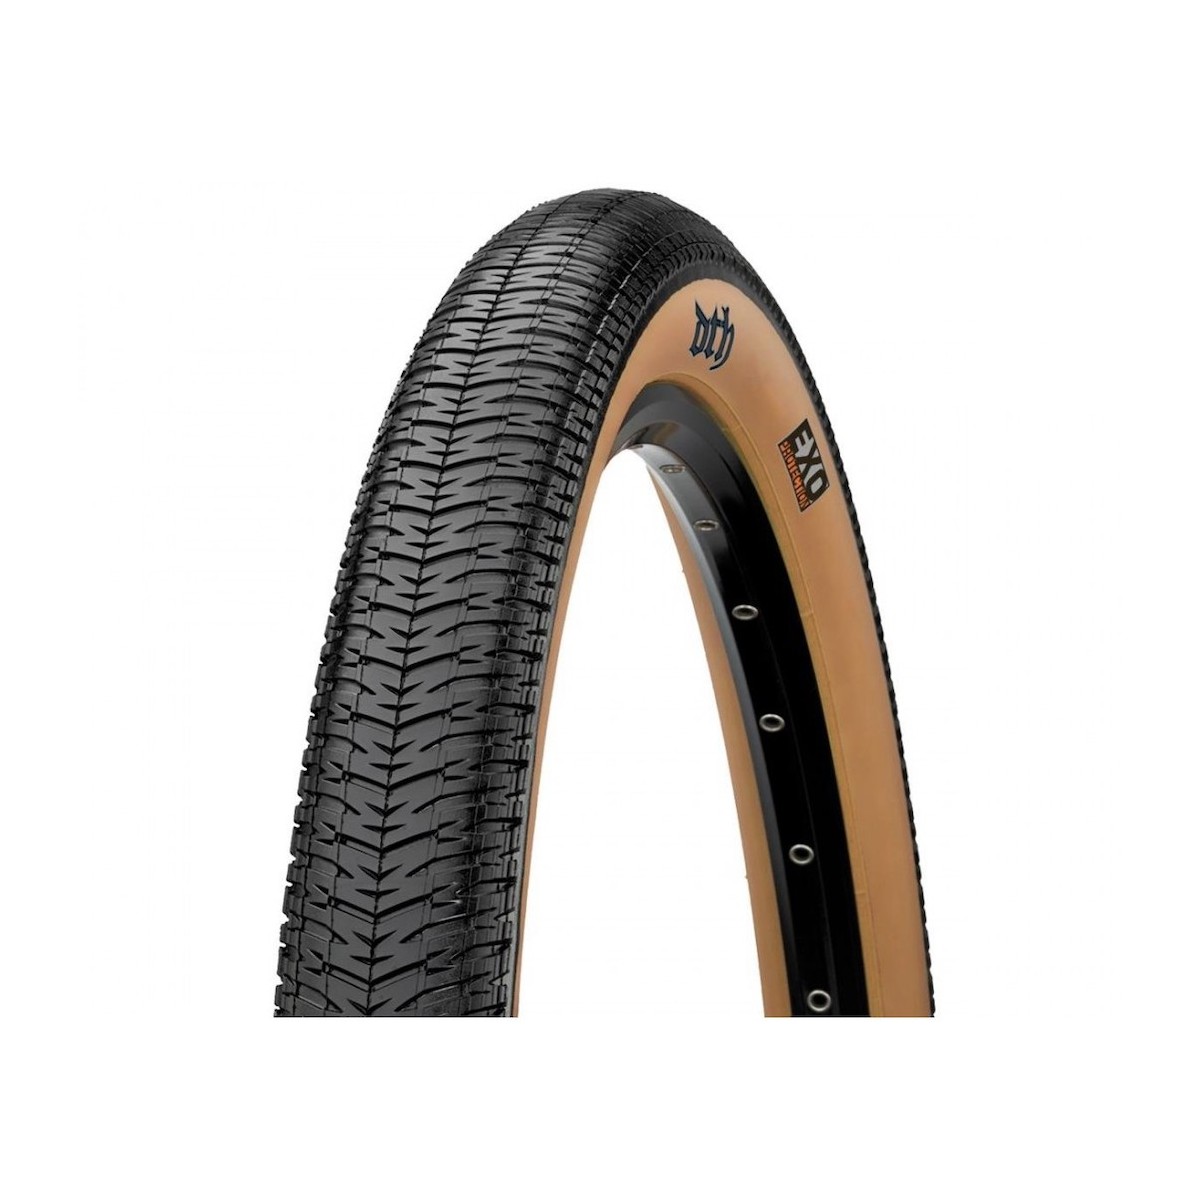 MAXXIS 26 x 2.15 DTH tyre